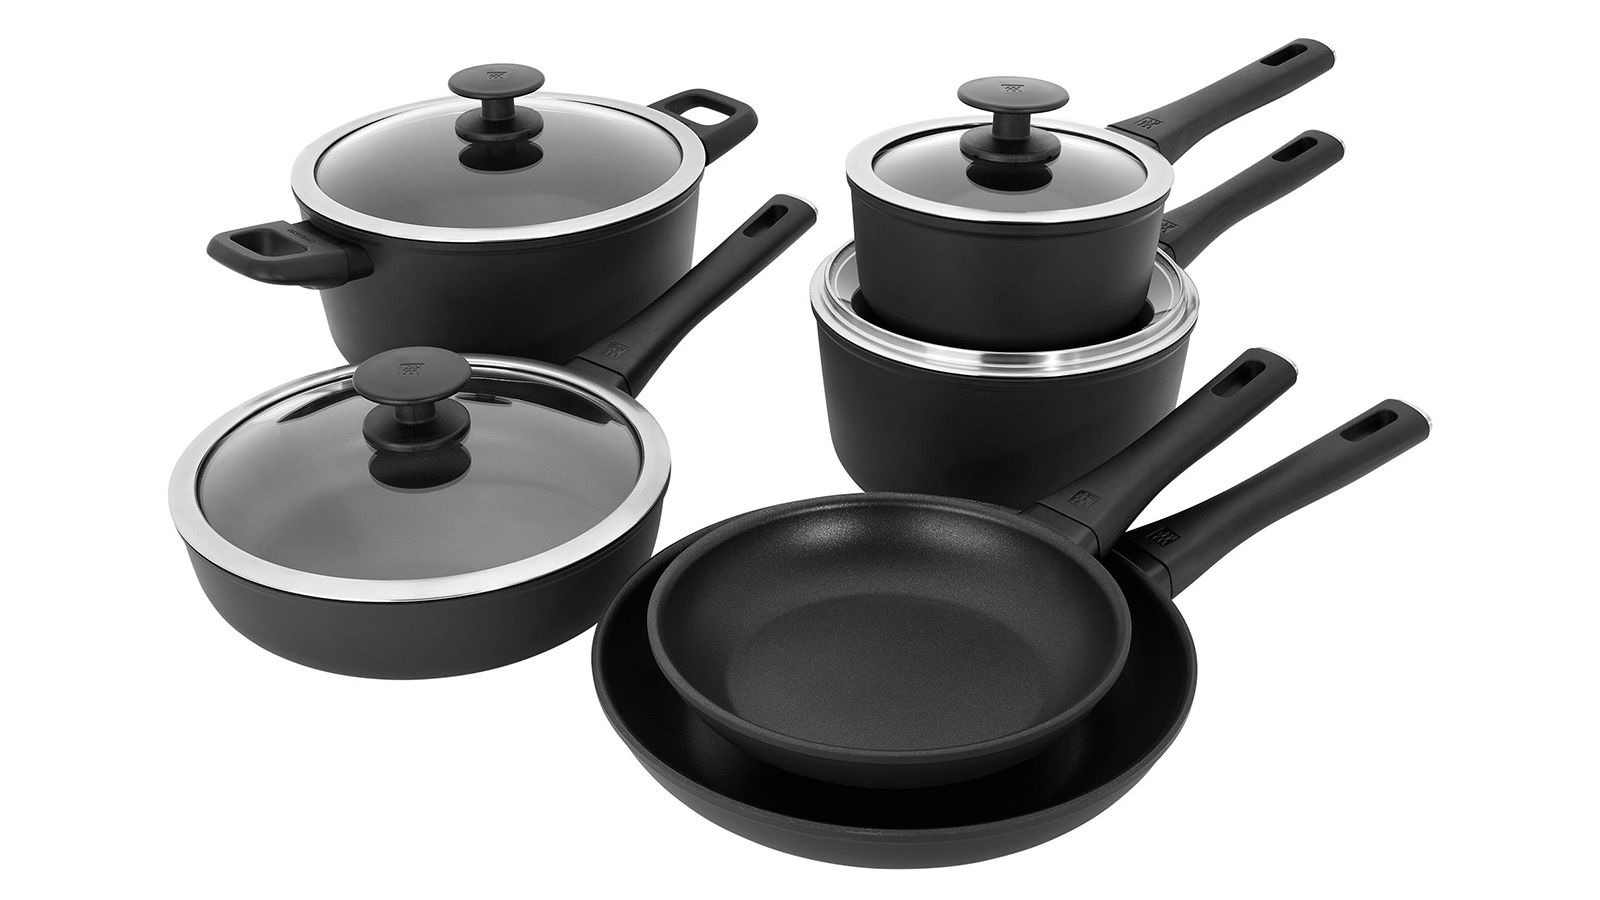 The Best Cookware Sets of 2023, According to Our Tests